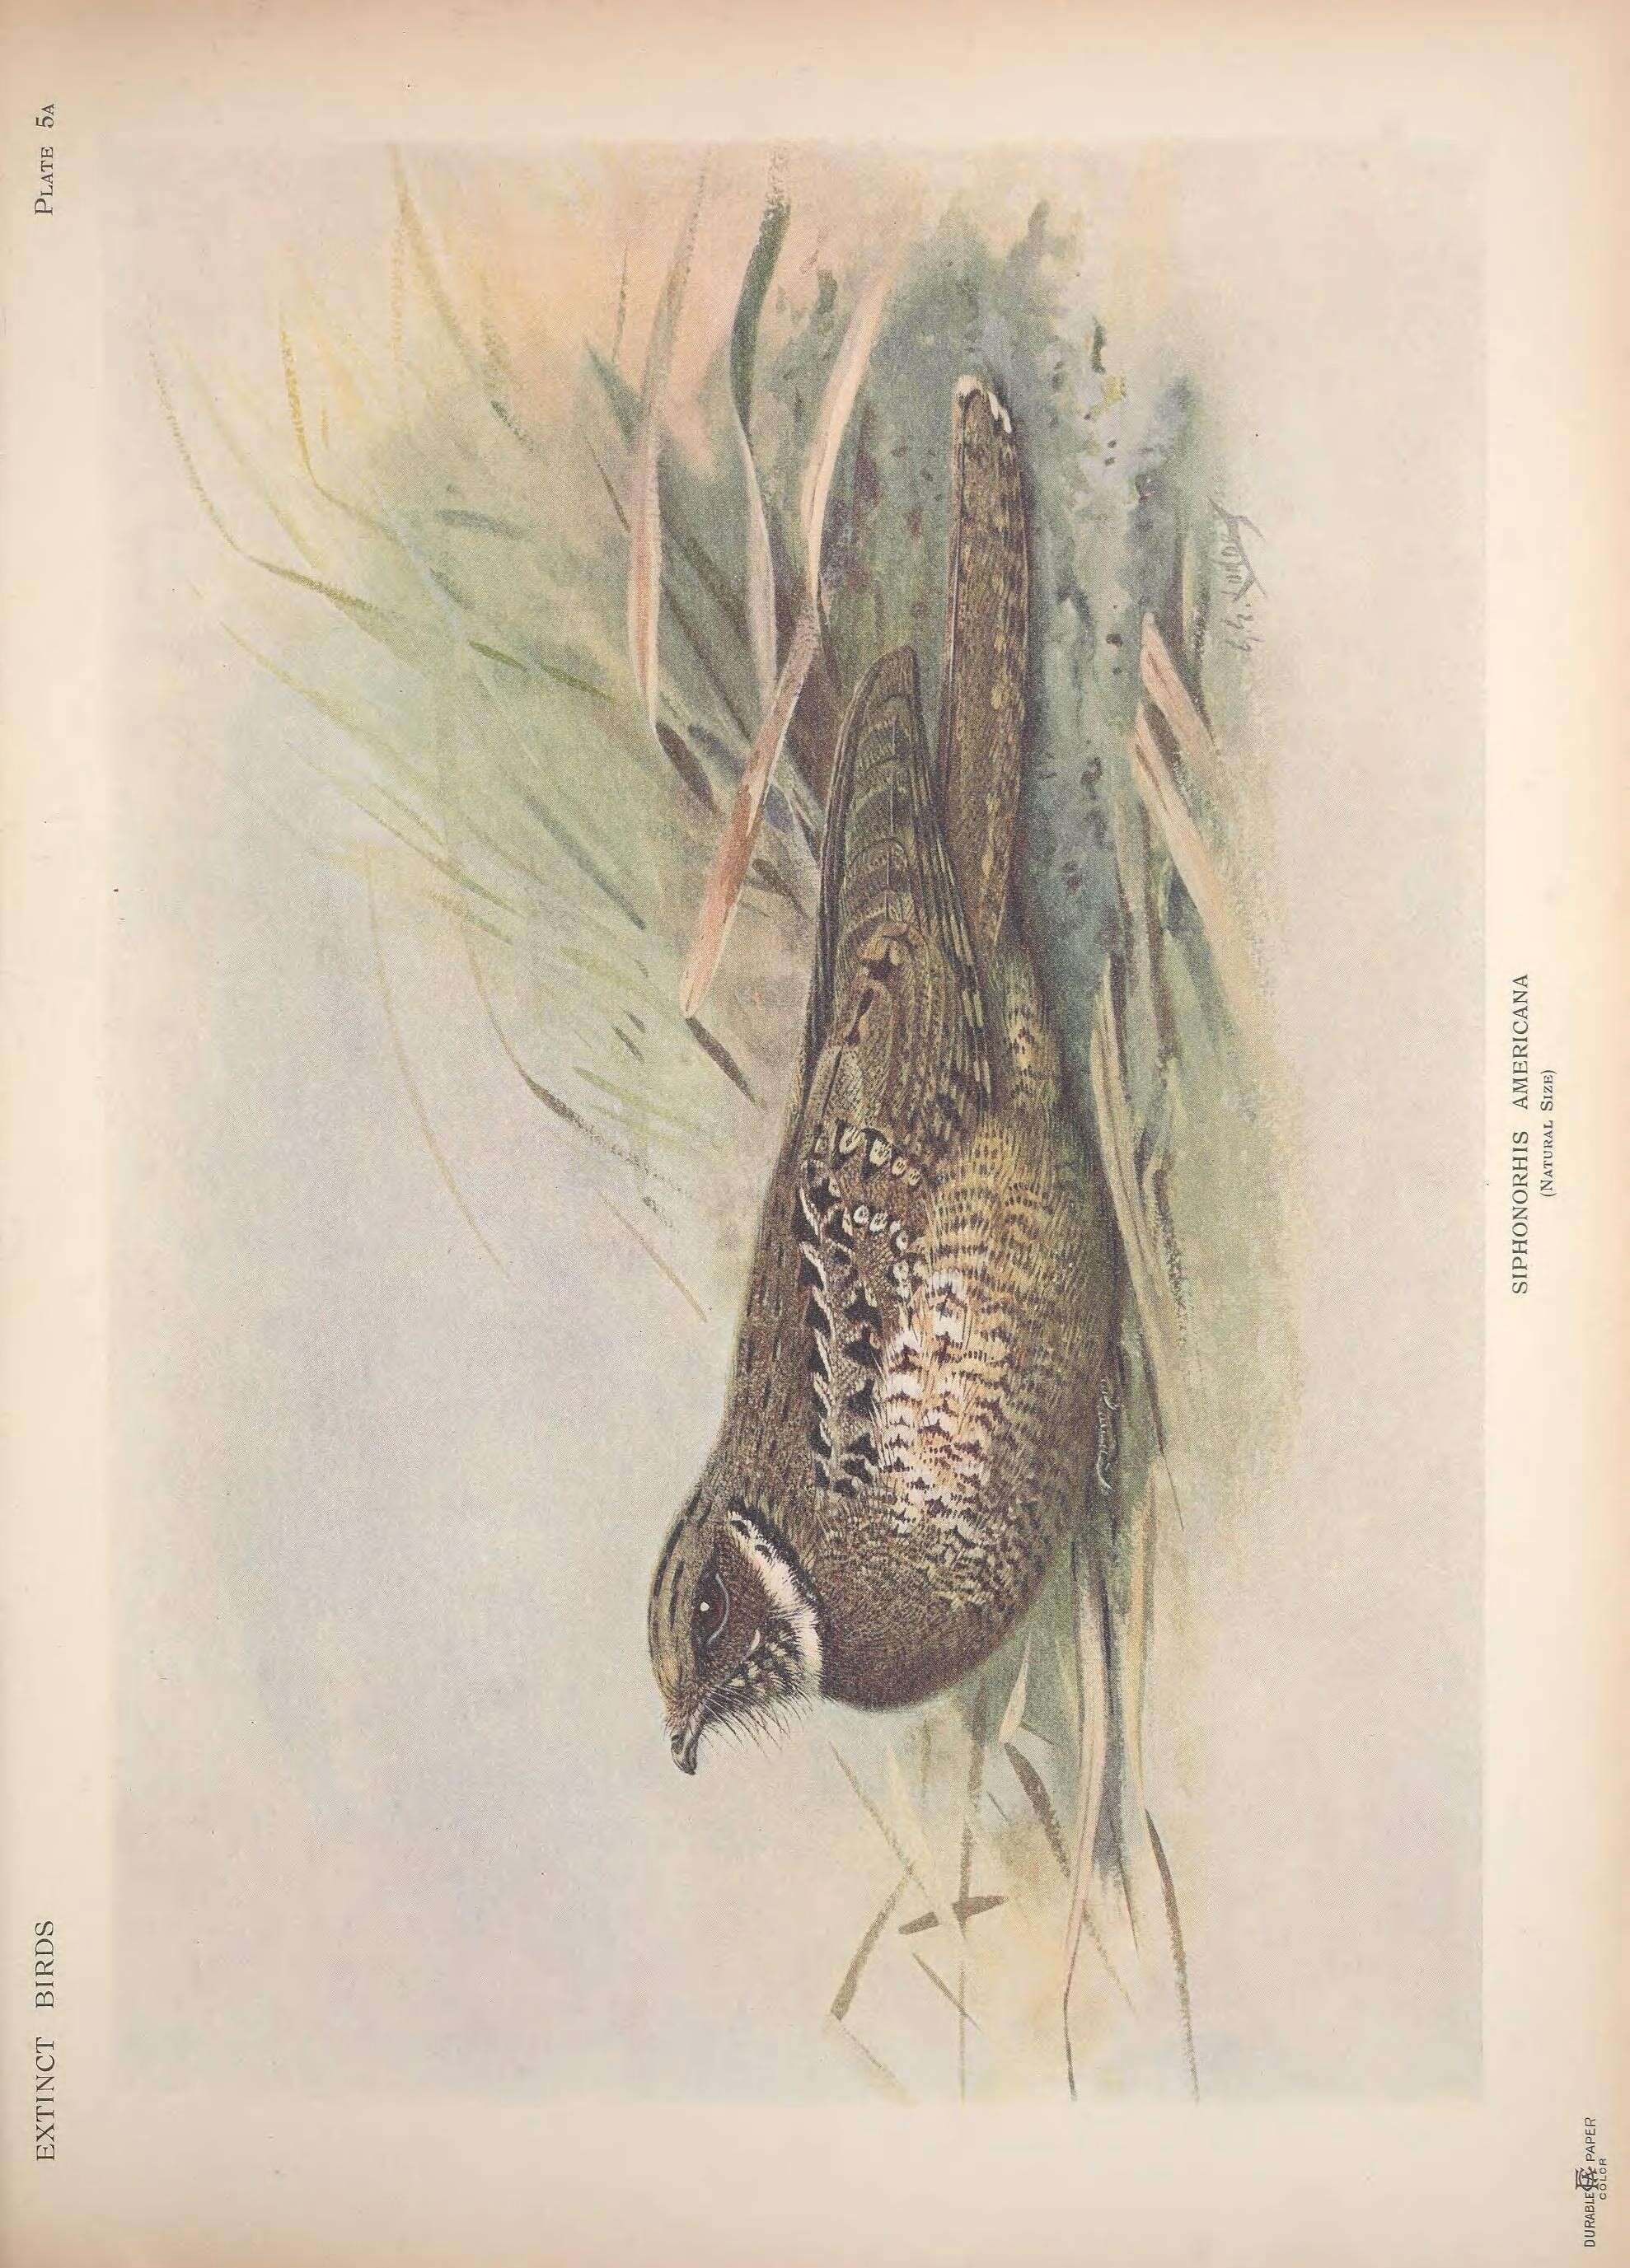 Image of Siphonorhis Sclater & PL 1861